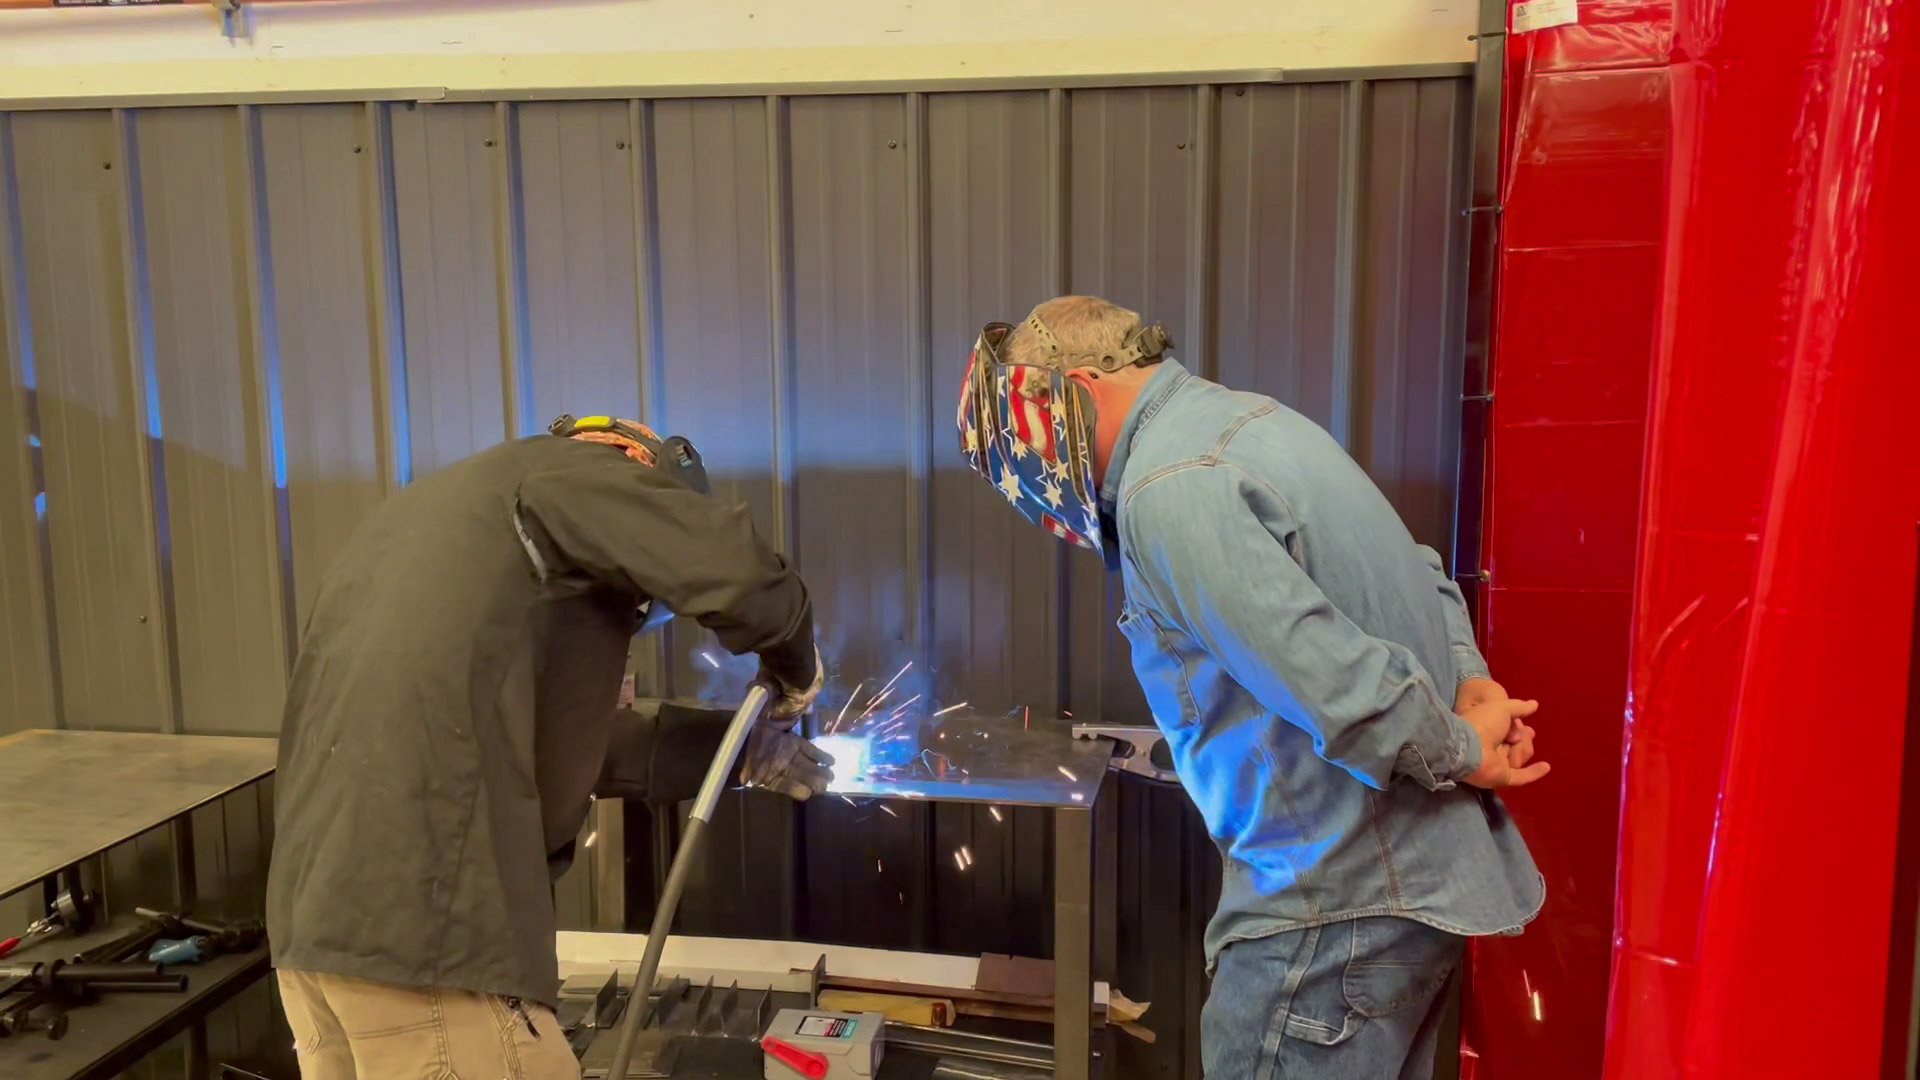 Student with welding torch sparks during instruction